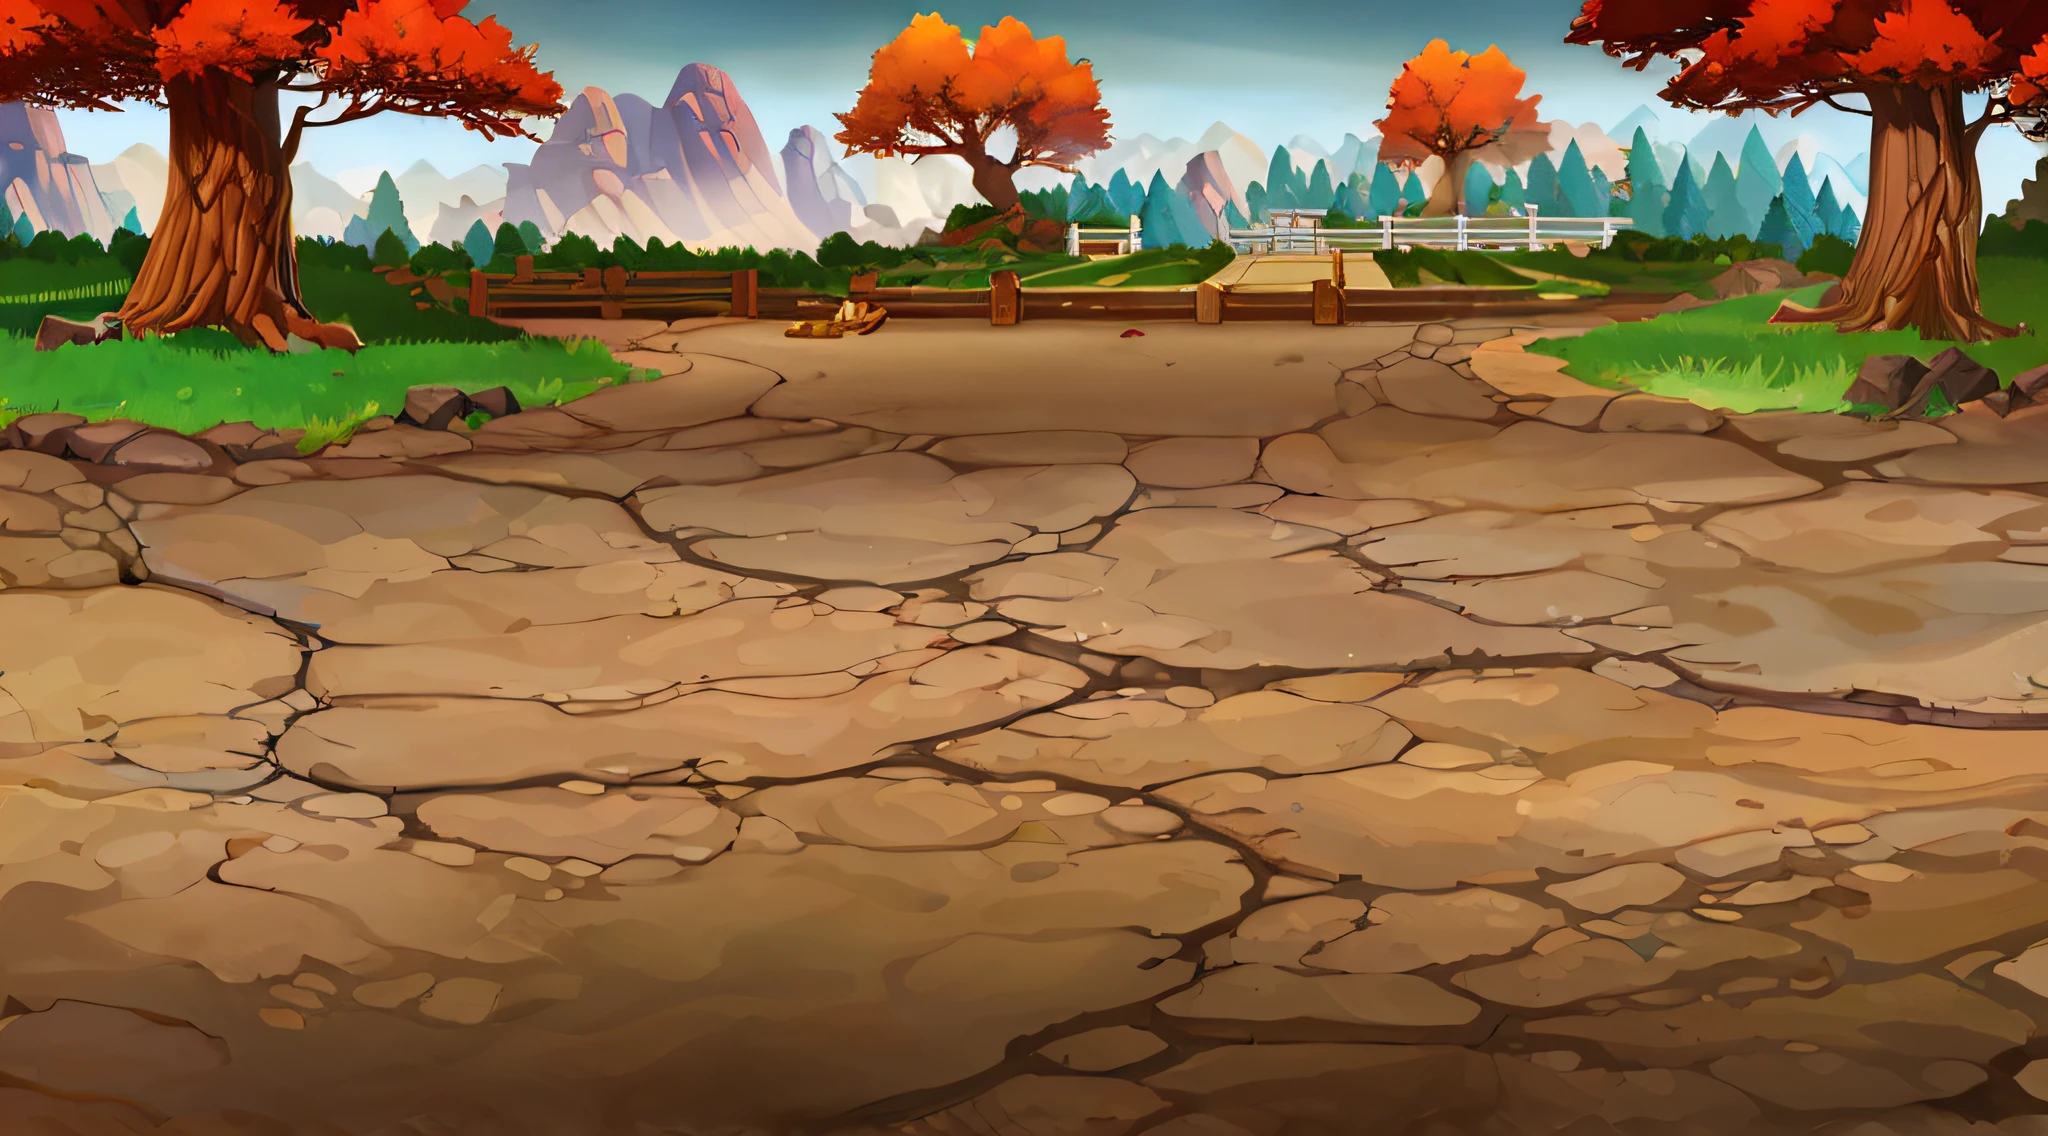 Cartoon illustration of a dirt road with a bridge in the middle, Mobile game background, arena background, odin's stone arena background, game background, battleground background, volley court background, arte de fundo, Park background, canyon background, 2d game background, background battlefield, battleground background, tavern background, background hyper detailed, Cave background, videogame background, 2 D game art background